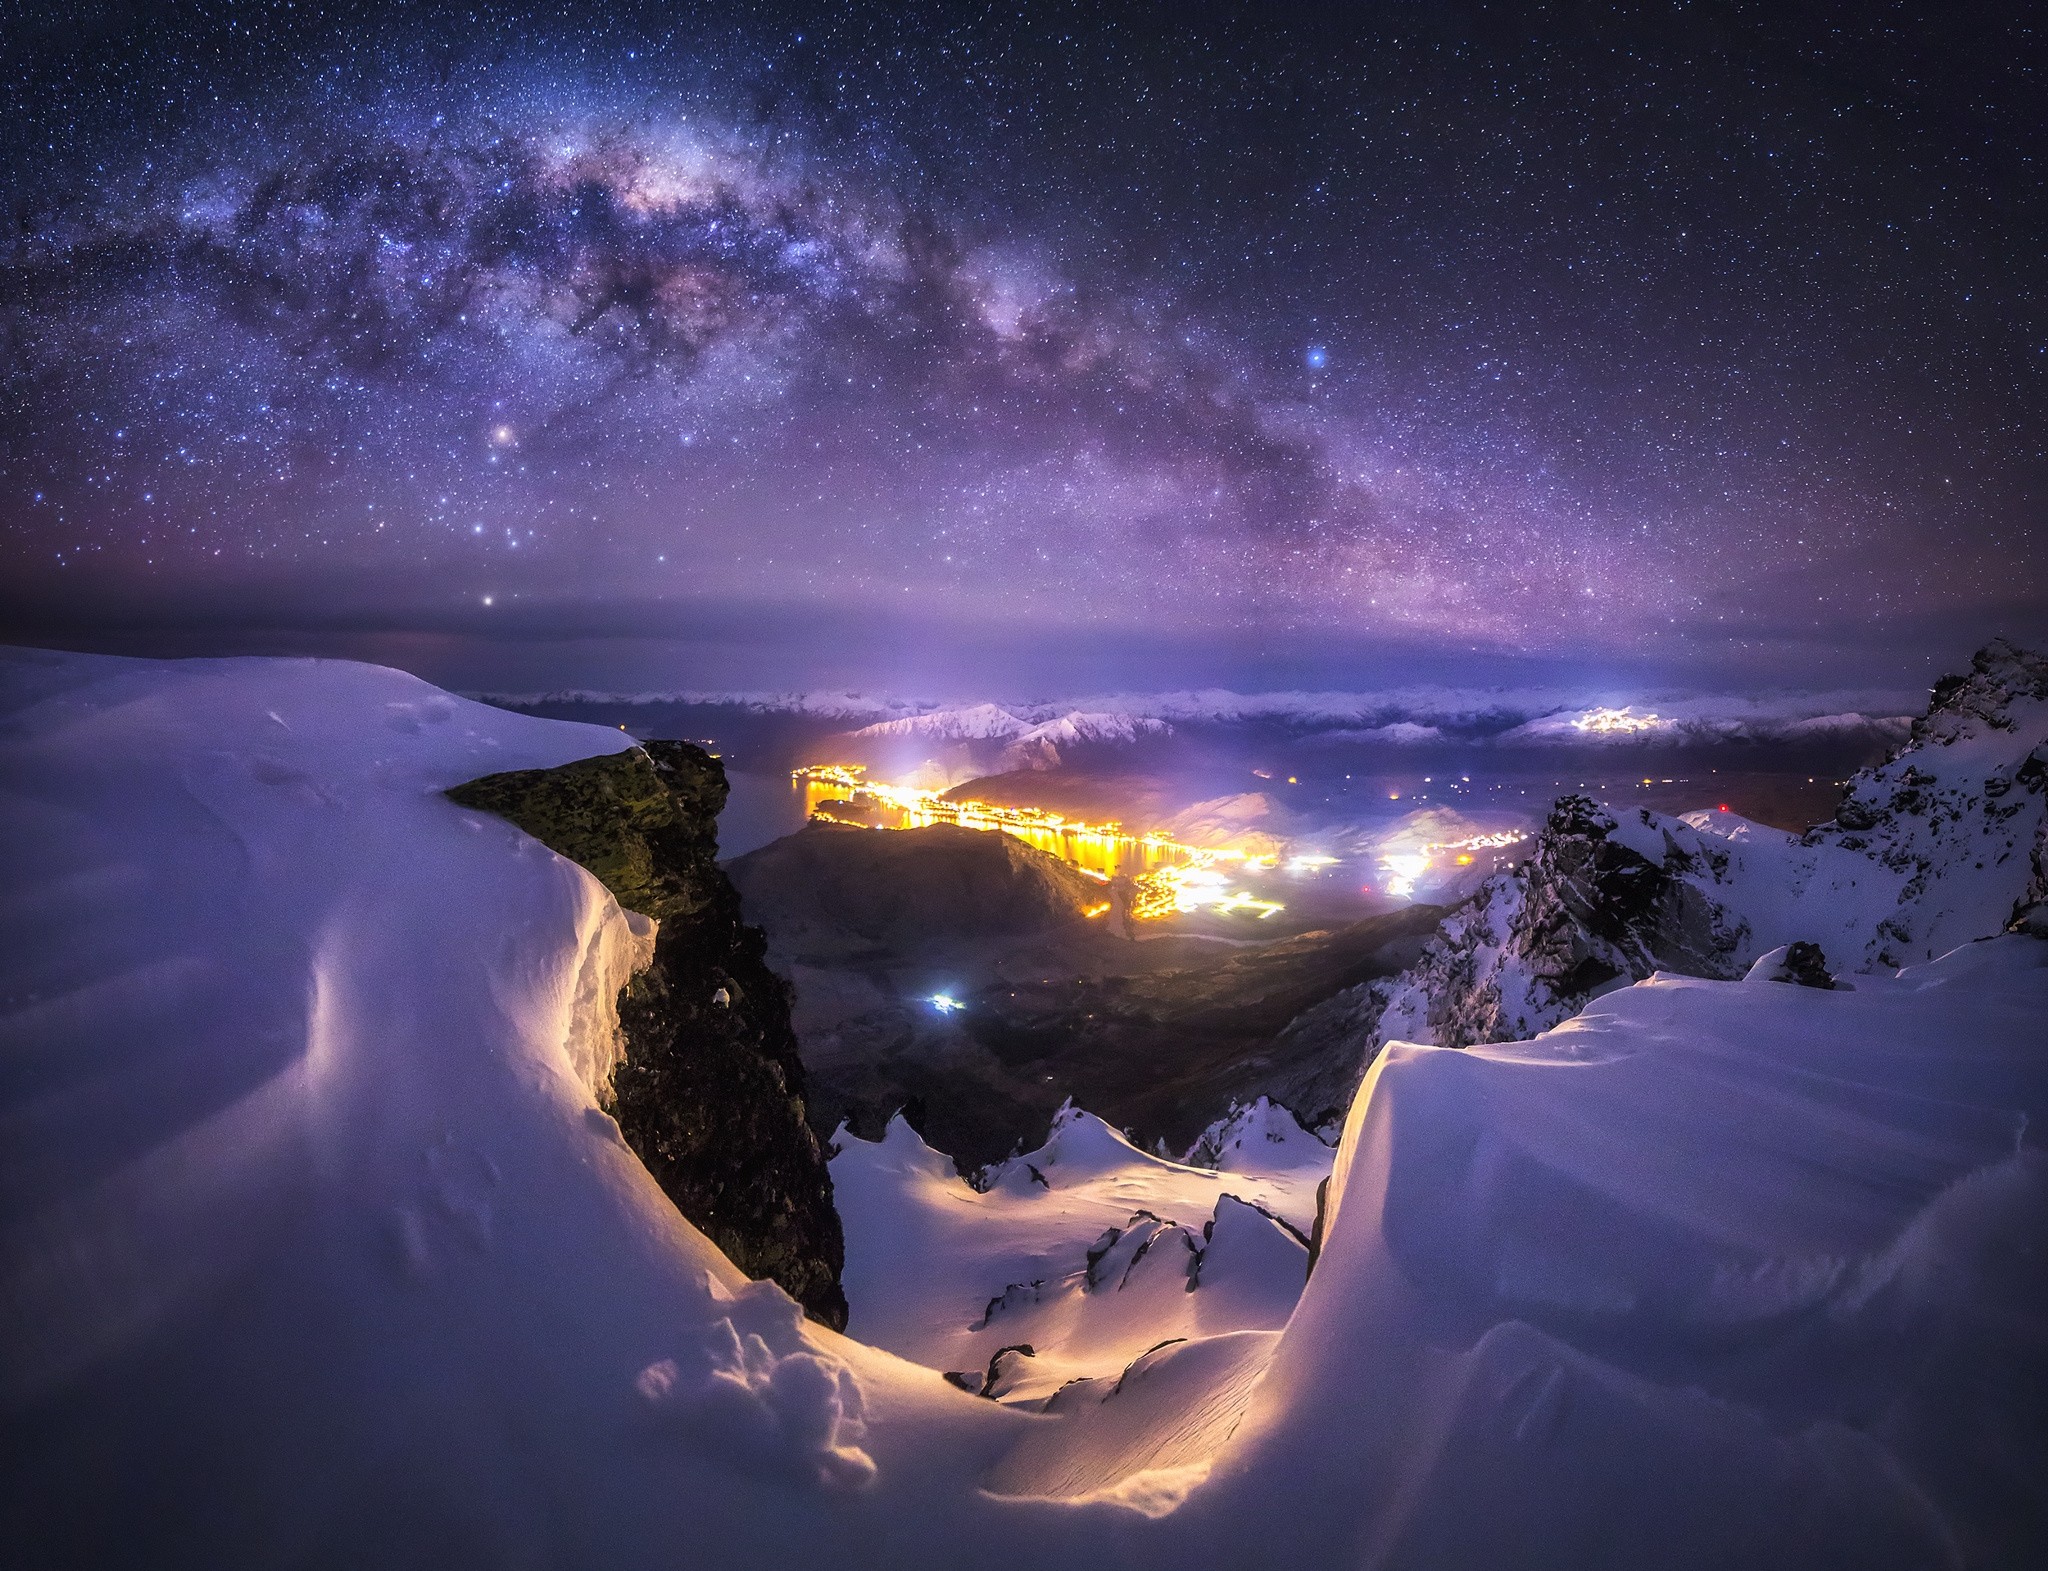 General 2048x1571 landscape nature Milky Way galaxy city starry night mountains snow winter Queenstown lights New Zealand long exposure